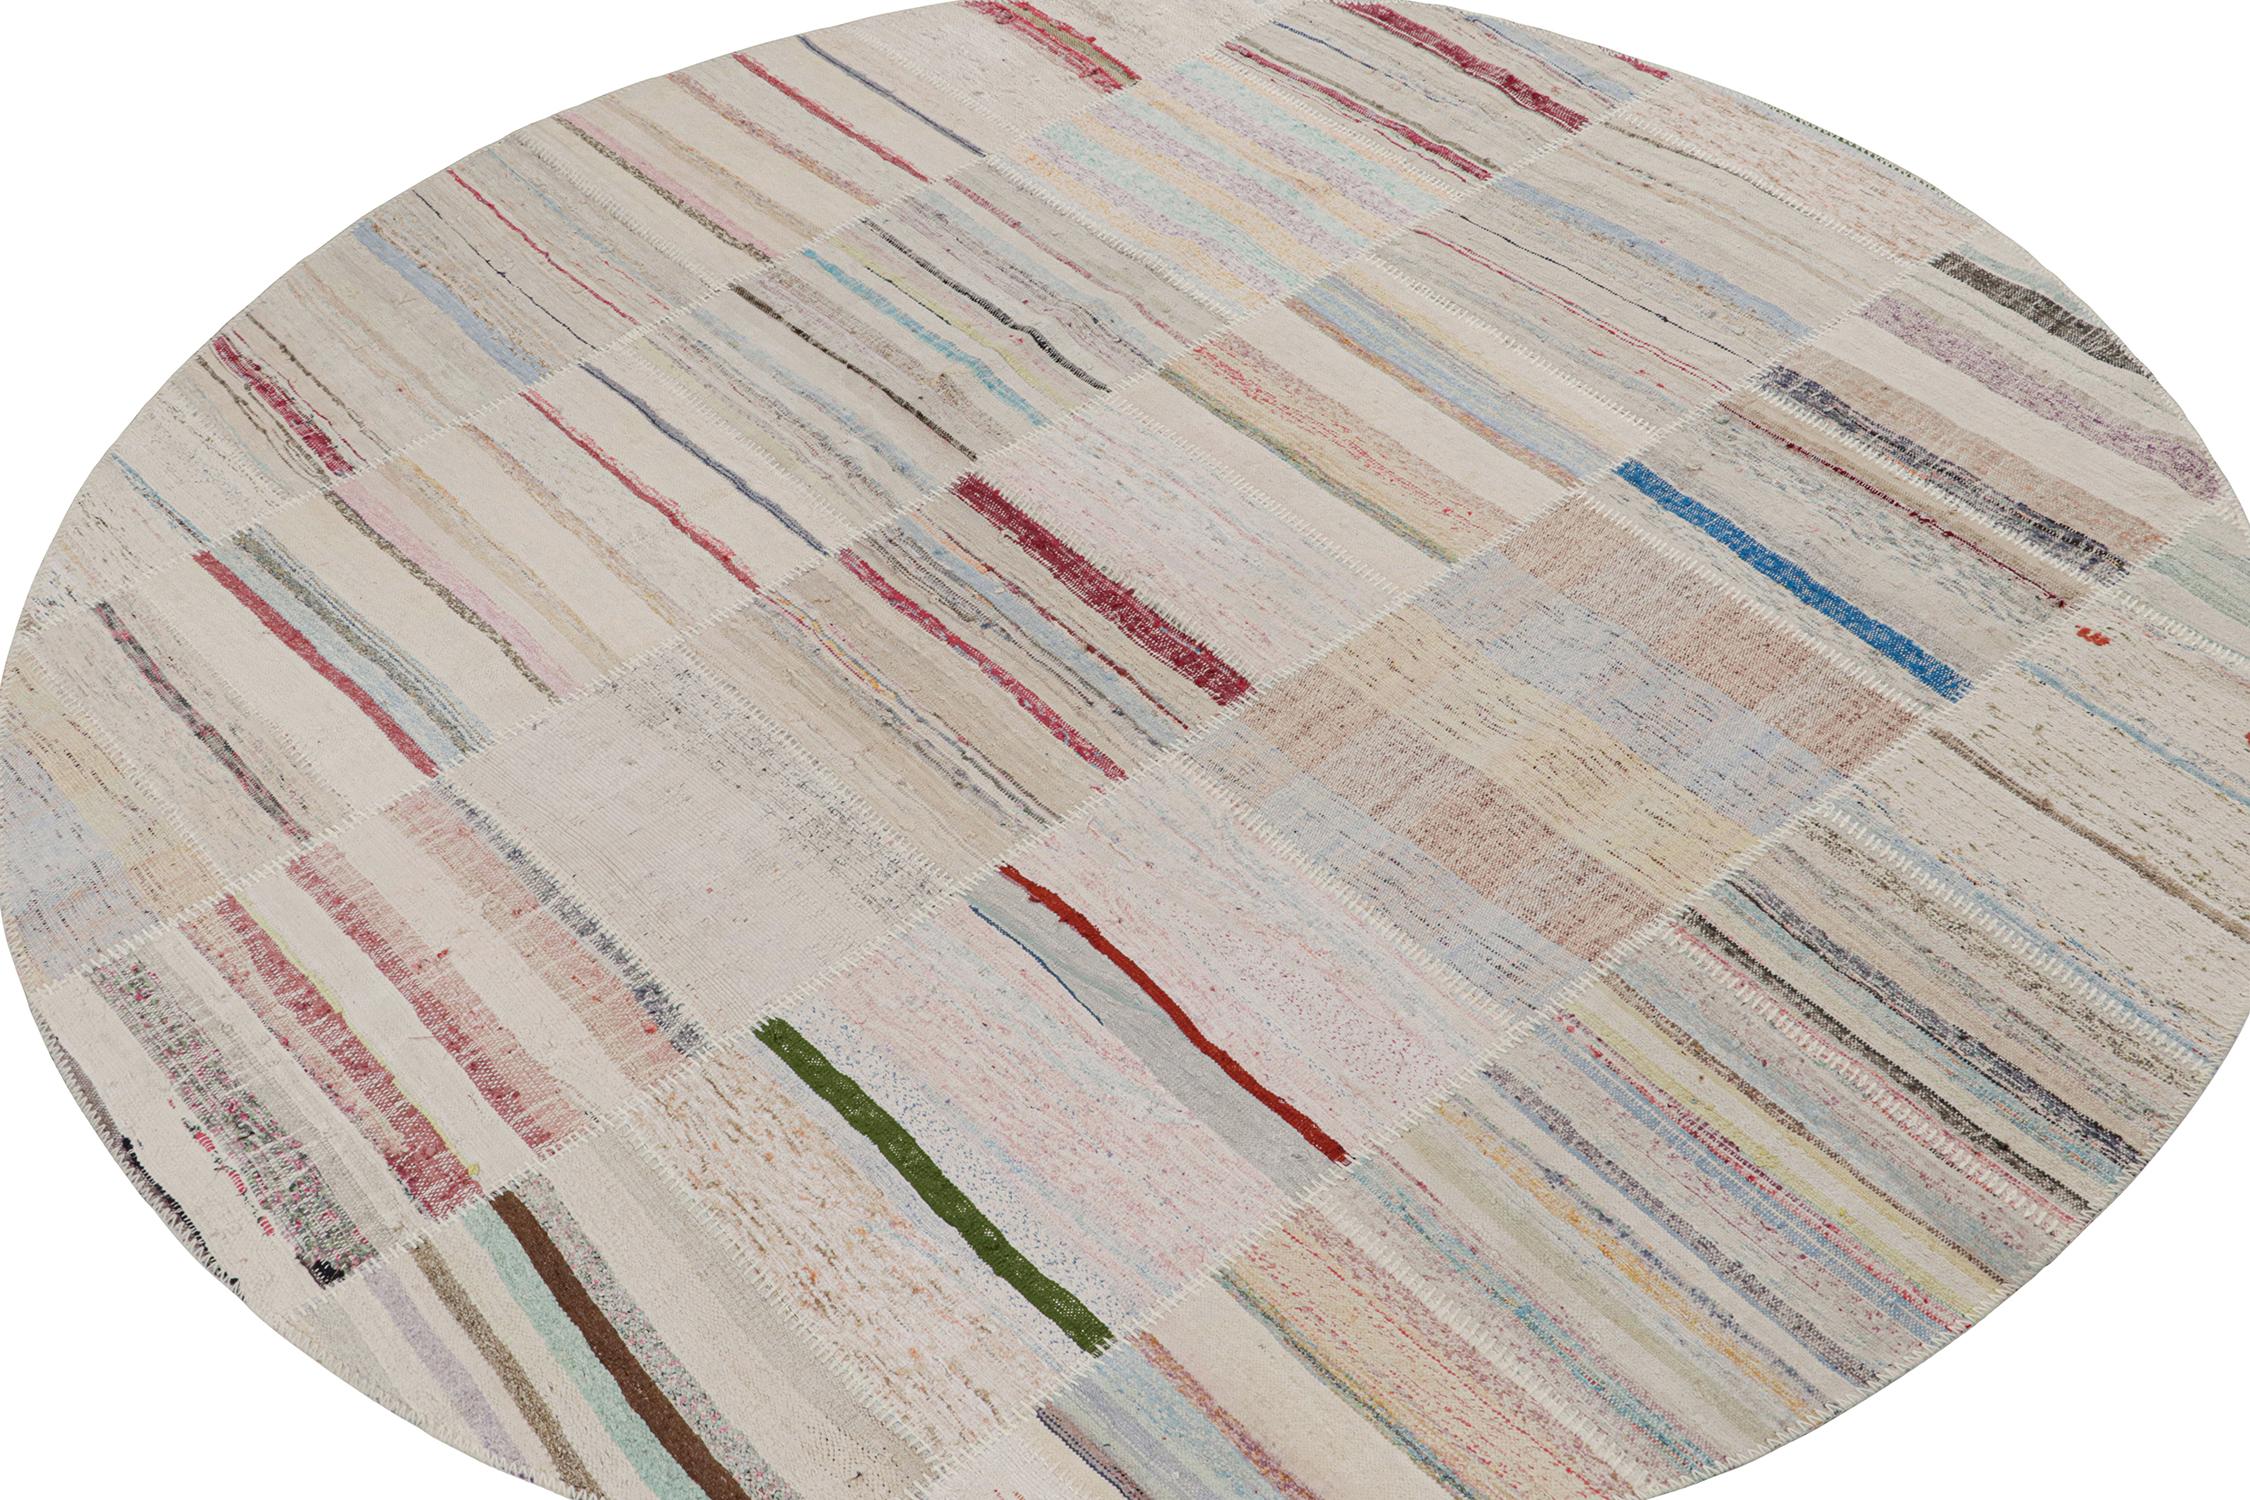 Rug & Kilim presents a contemporary 9’ circle rug from their innovative new patchwork kilim collection. 

On the Design: 

This flat weave technique repurposes vintage yarns in polychromatic stripes and striae, achieving a playful look with